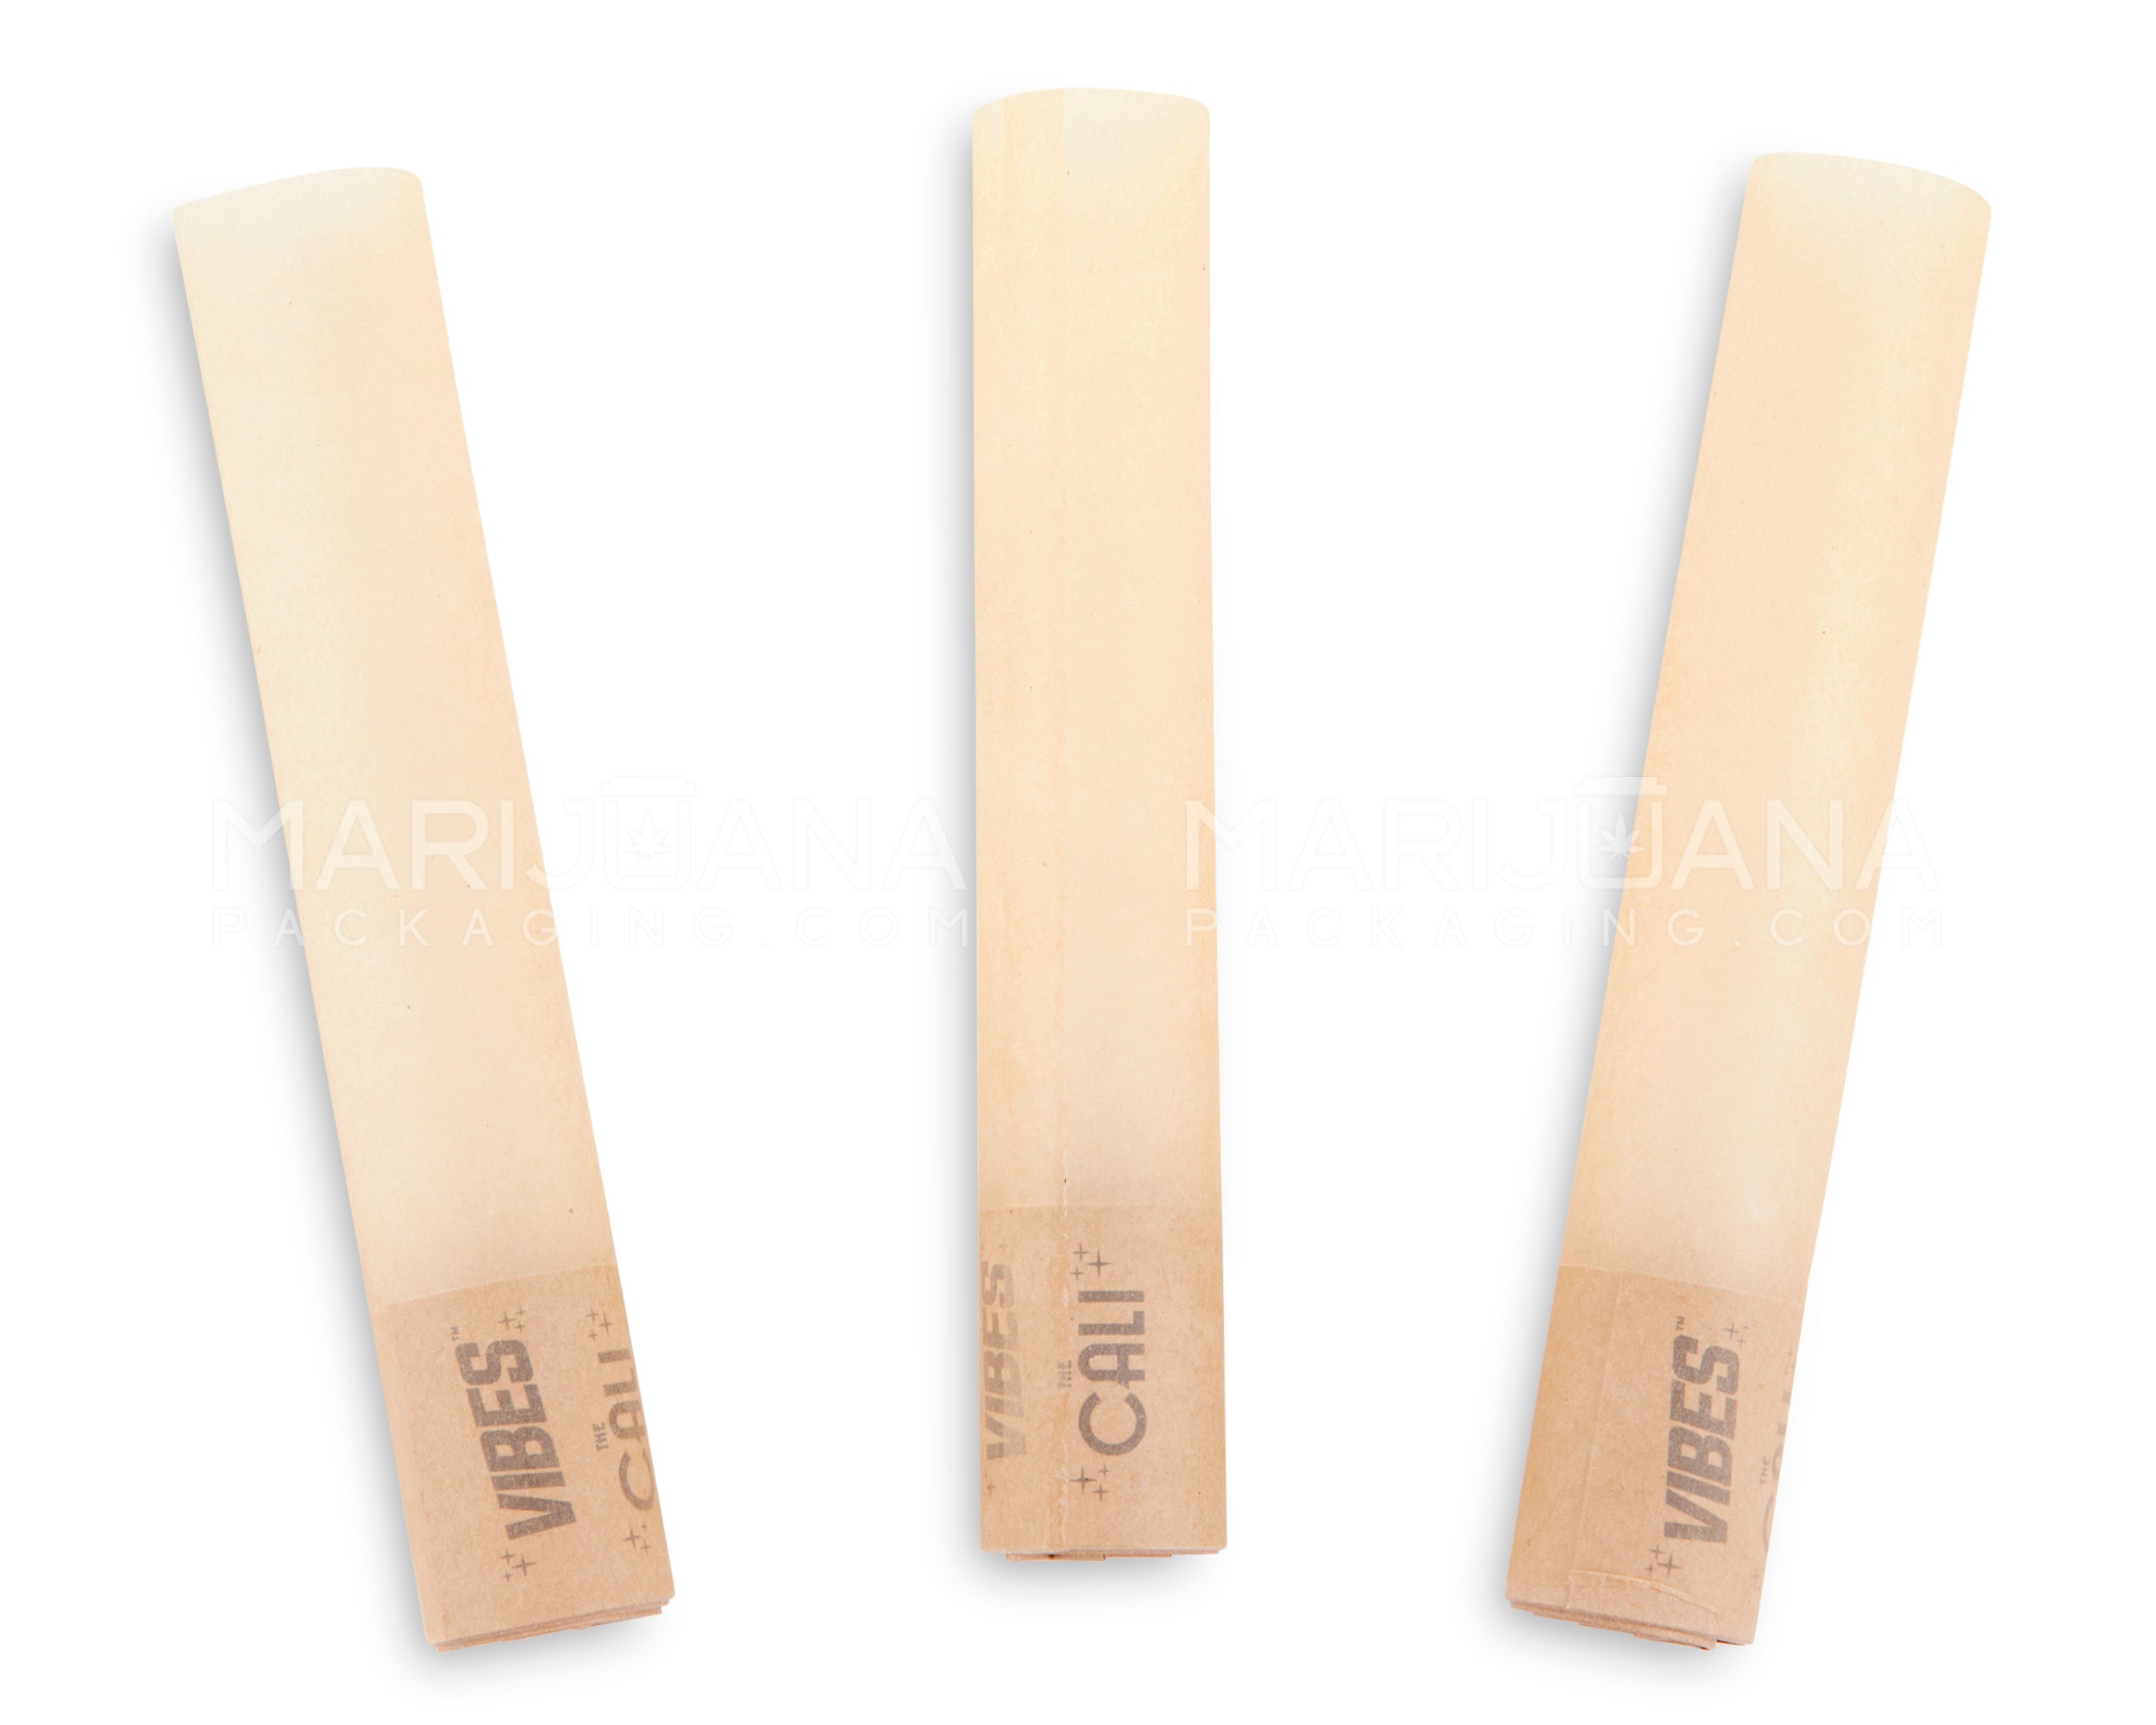 VIBES | 'Retail Display' The Cali 3 Gram Pre-Rolled Cones | 110mm - Ultra Thin Paper - 24 Count - 4